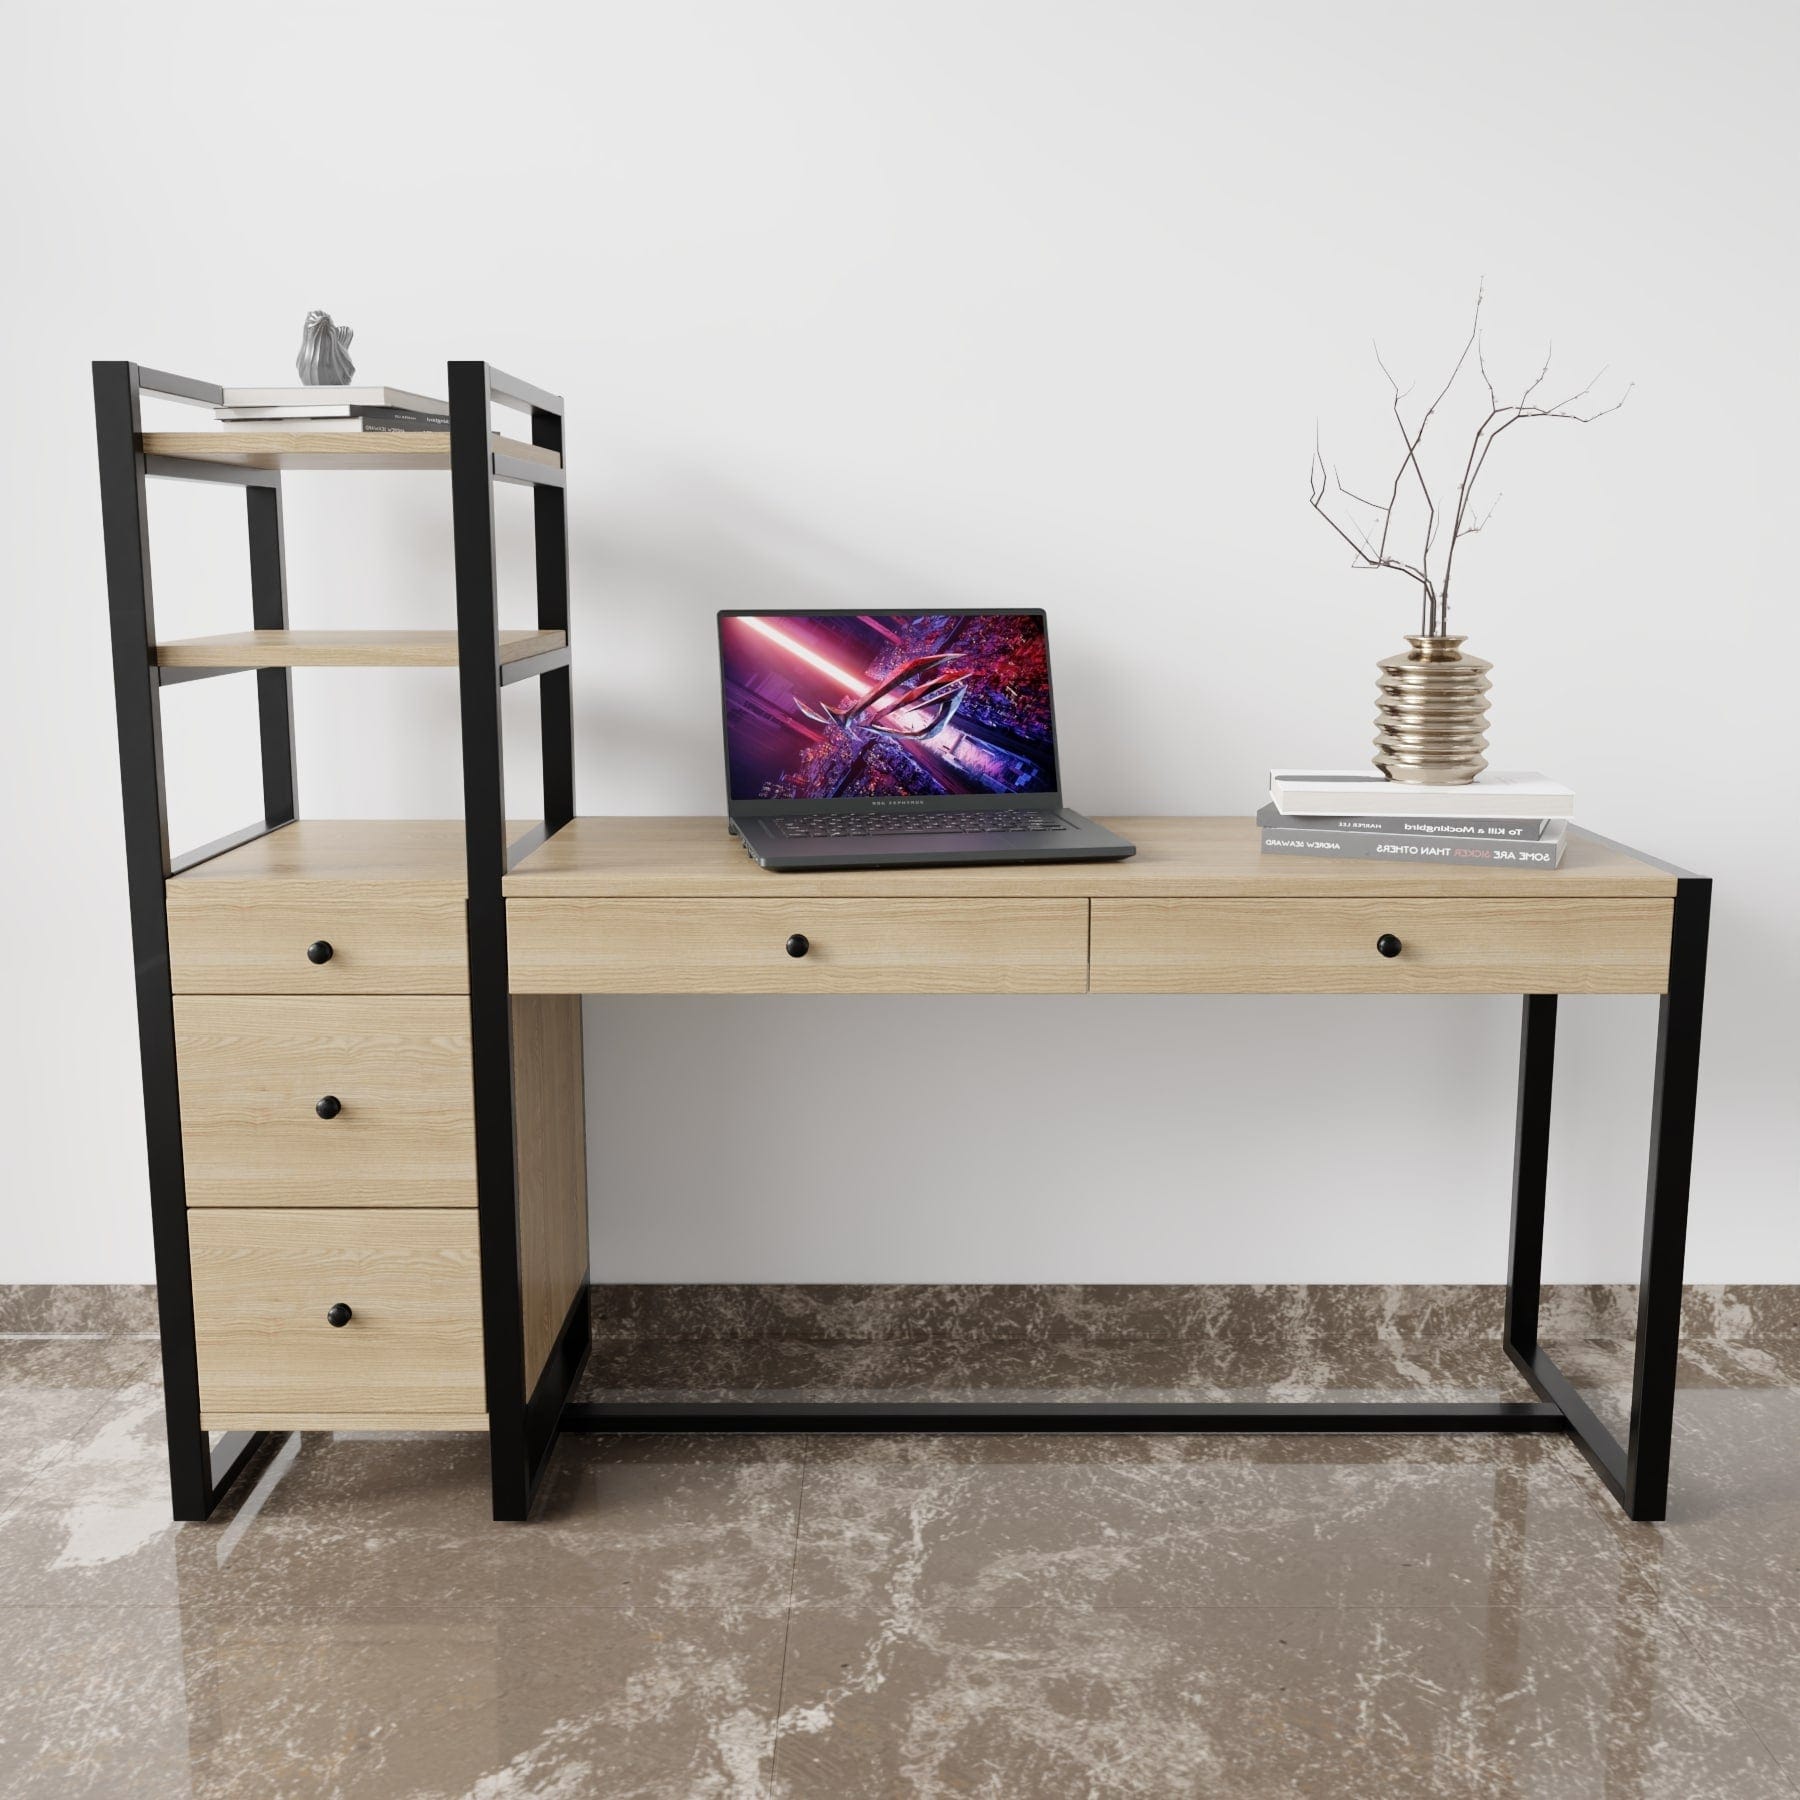 Best study table with storage design have drawer & open storage shelve, perfect for home office furniture